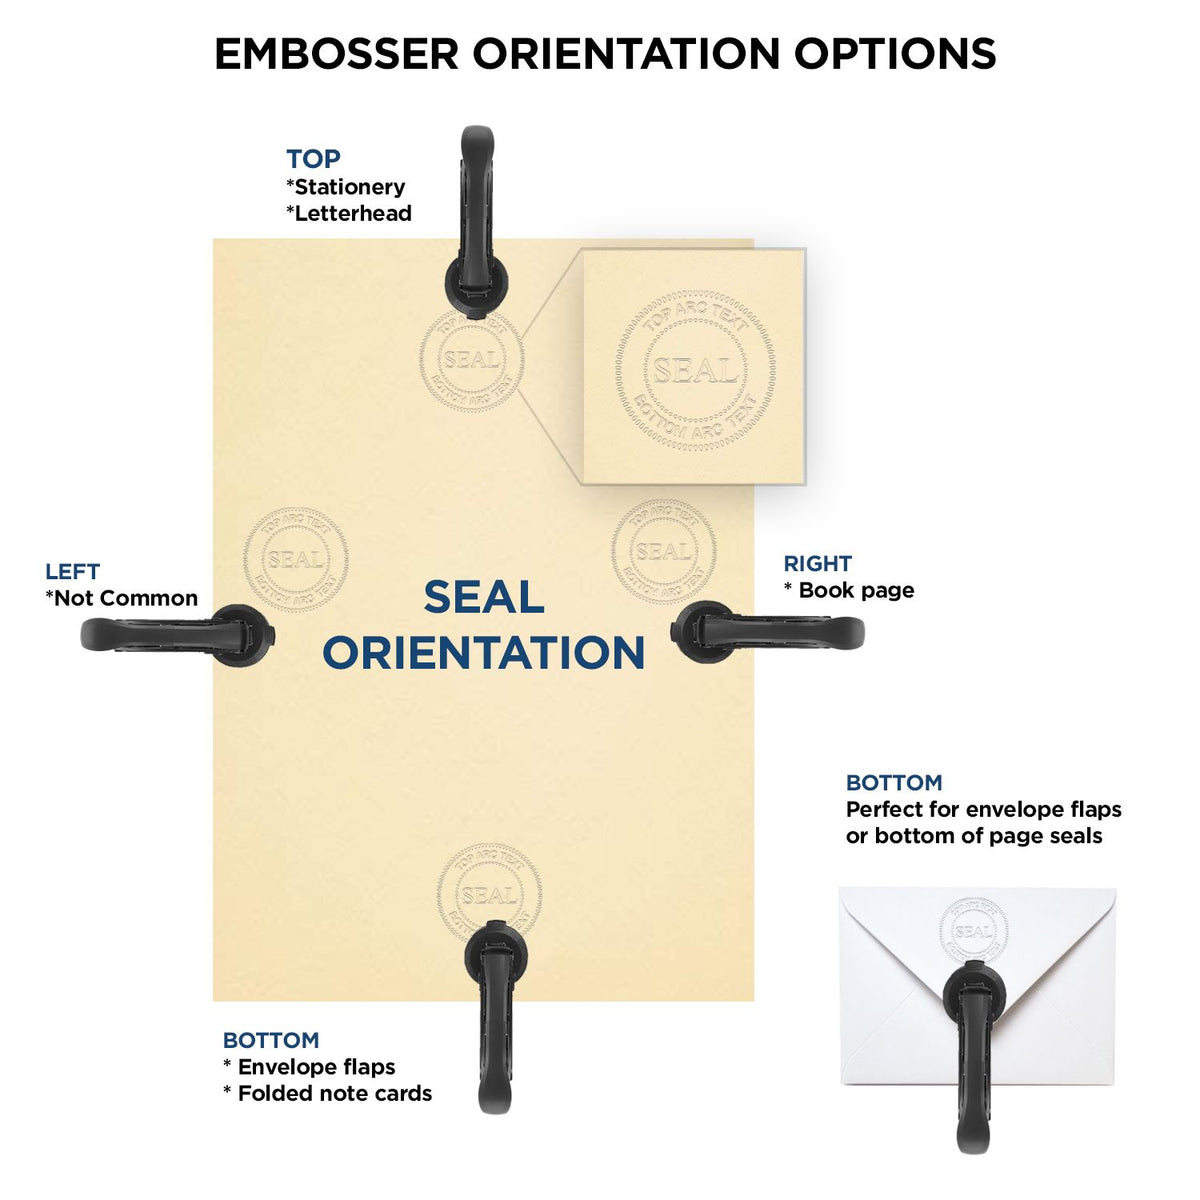 An infographic for the Gift Oklahoma Engineer Seal showing embosser orientation, this is showing examples of a top, bottom, right and left insert.